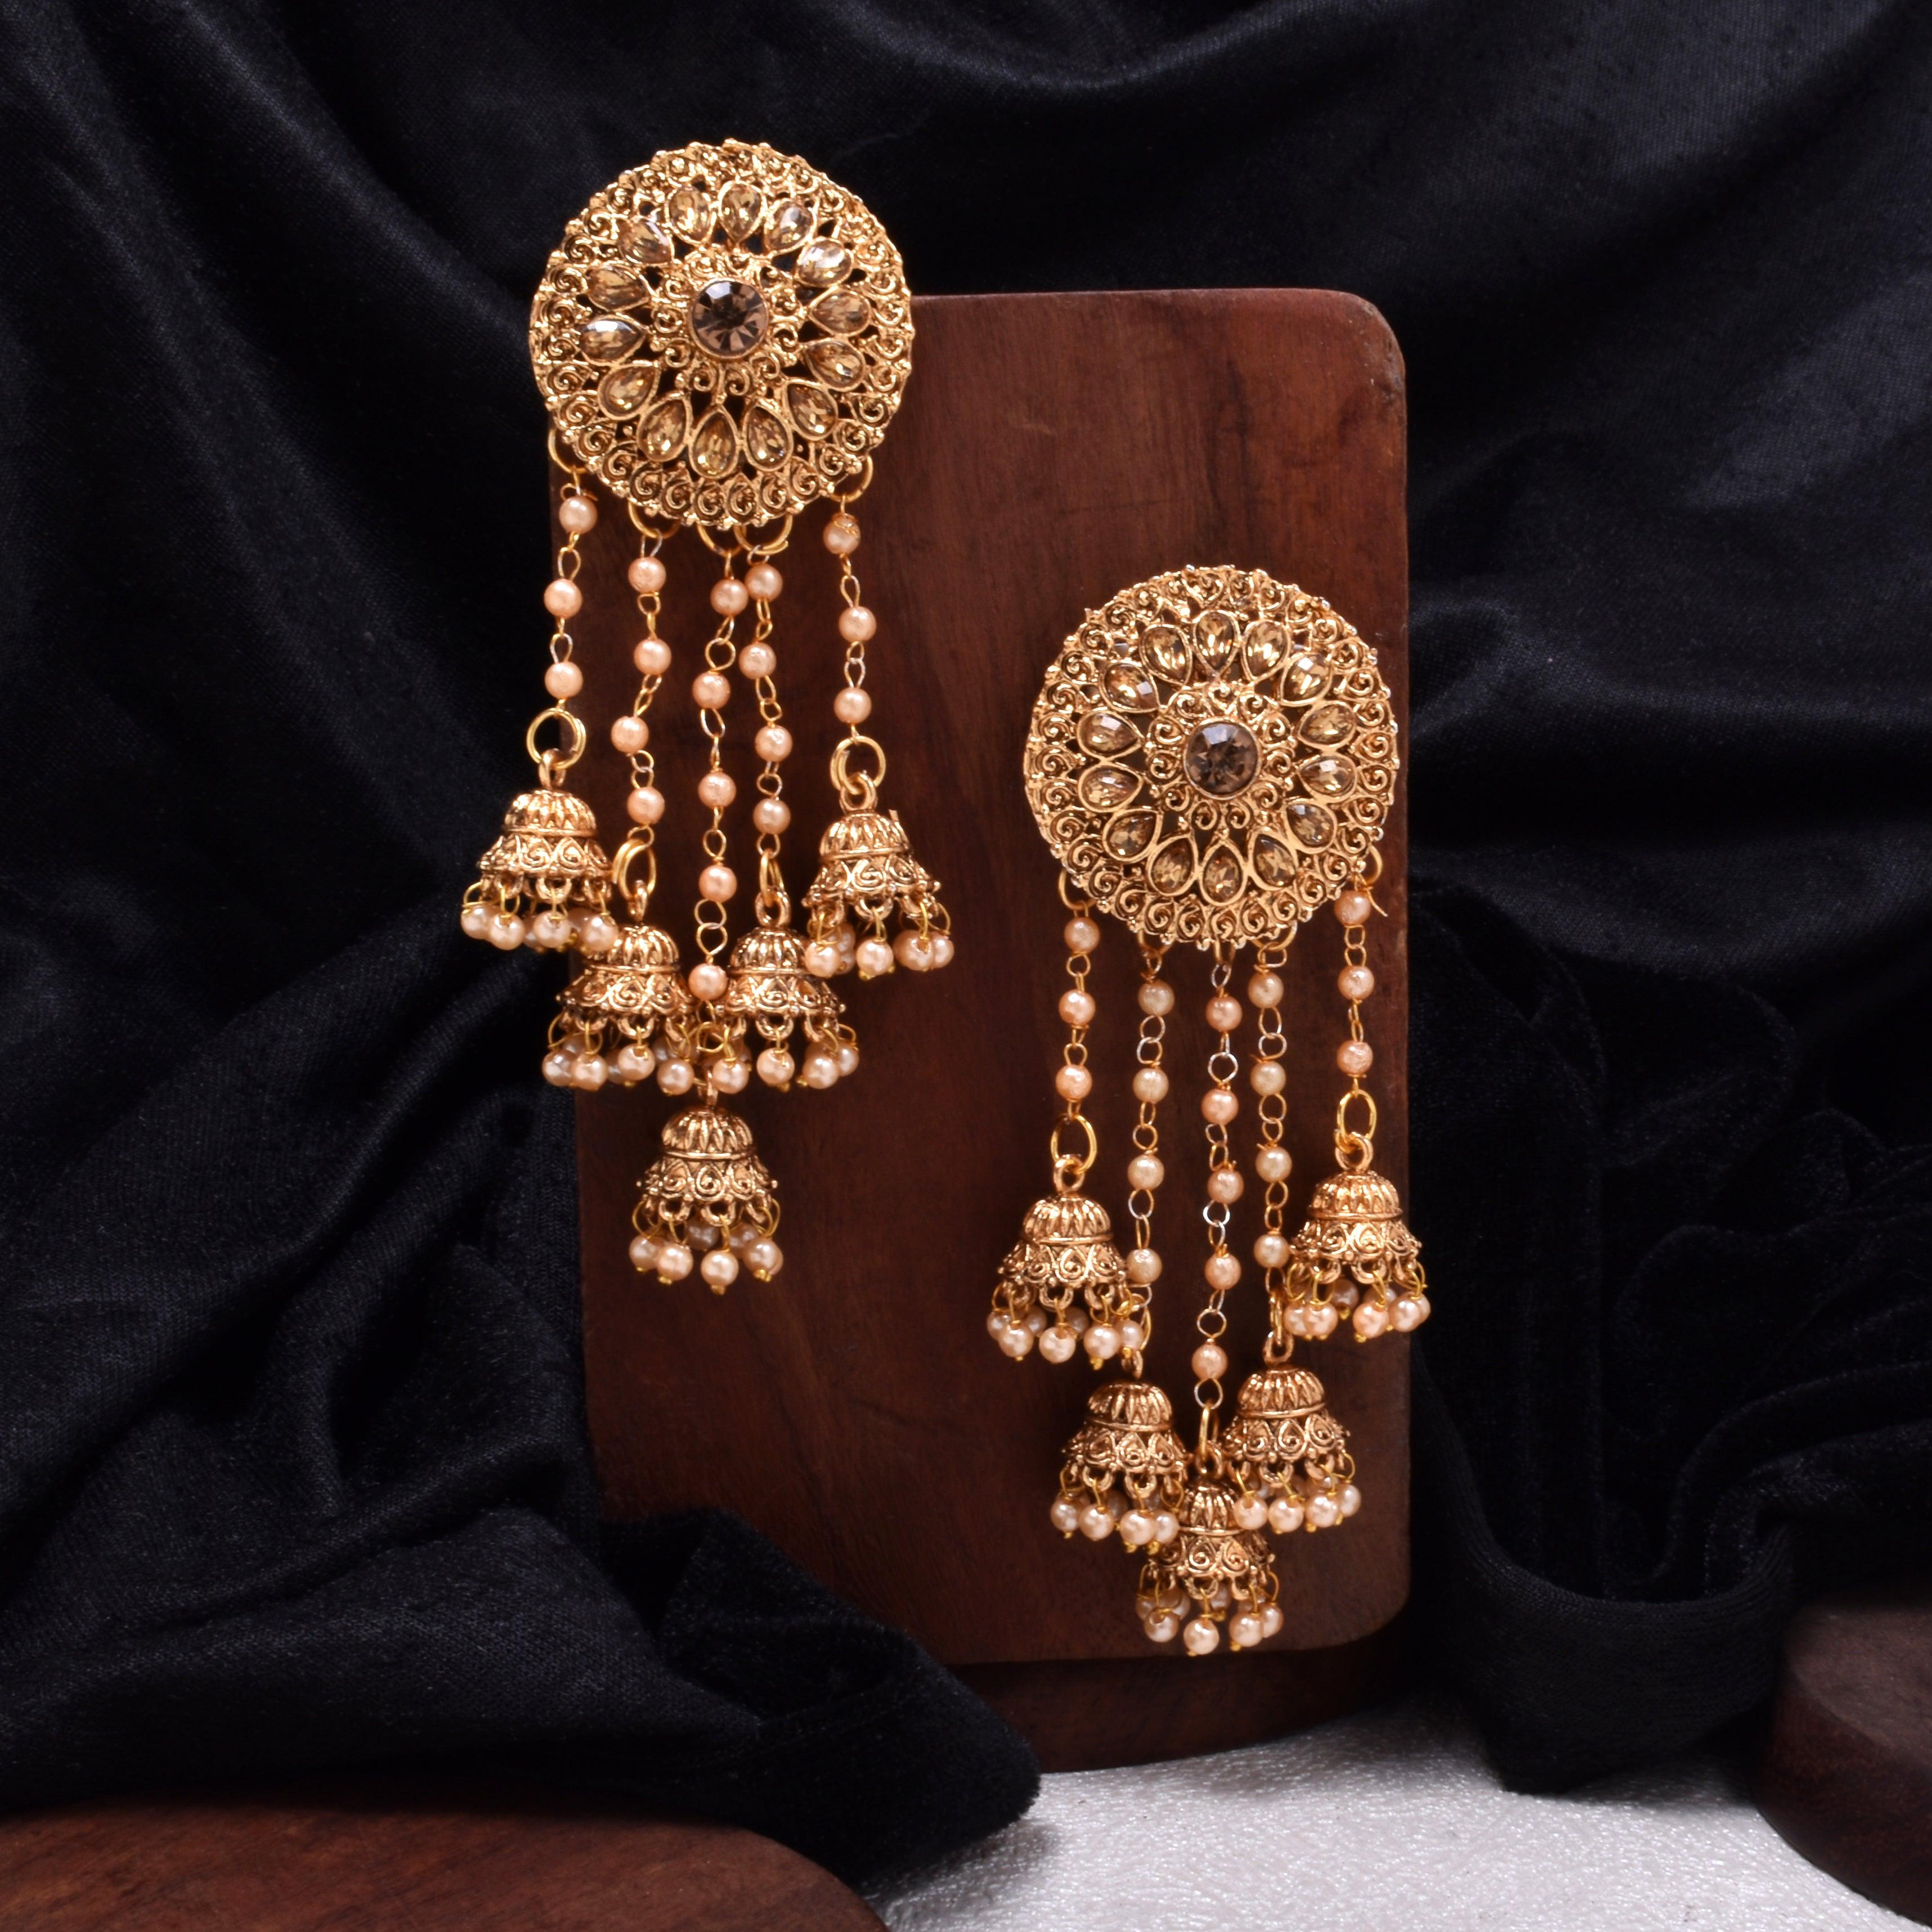 Sparkling Fashion: Gold Jhumka Earring designs latest 2019/ Gold buttalu | Gold  jhumka earrings, Gold jewellery design necklaces, Gold earrings designs